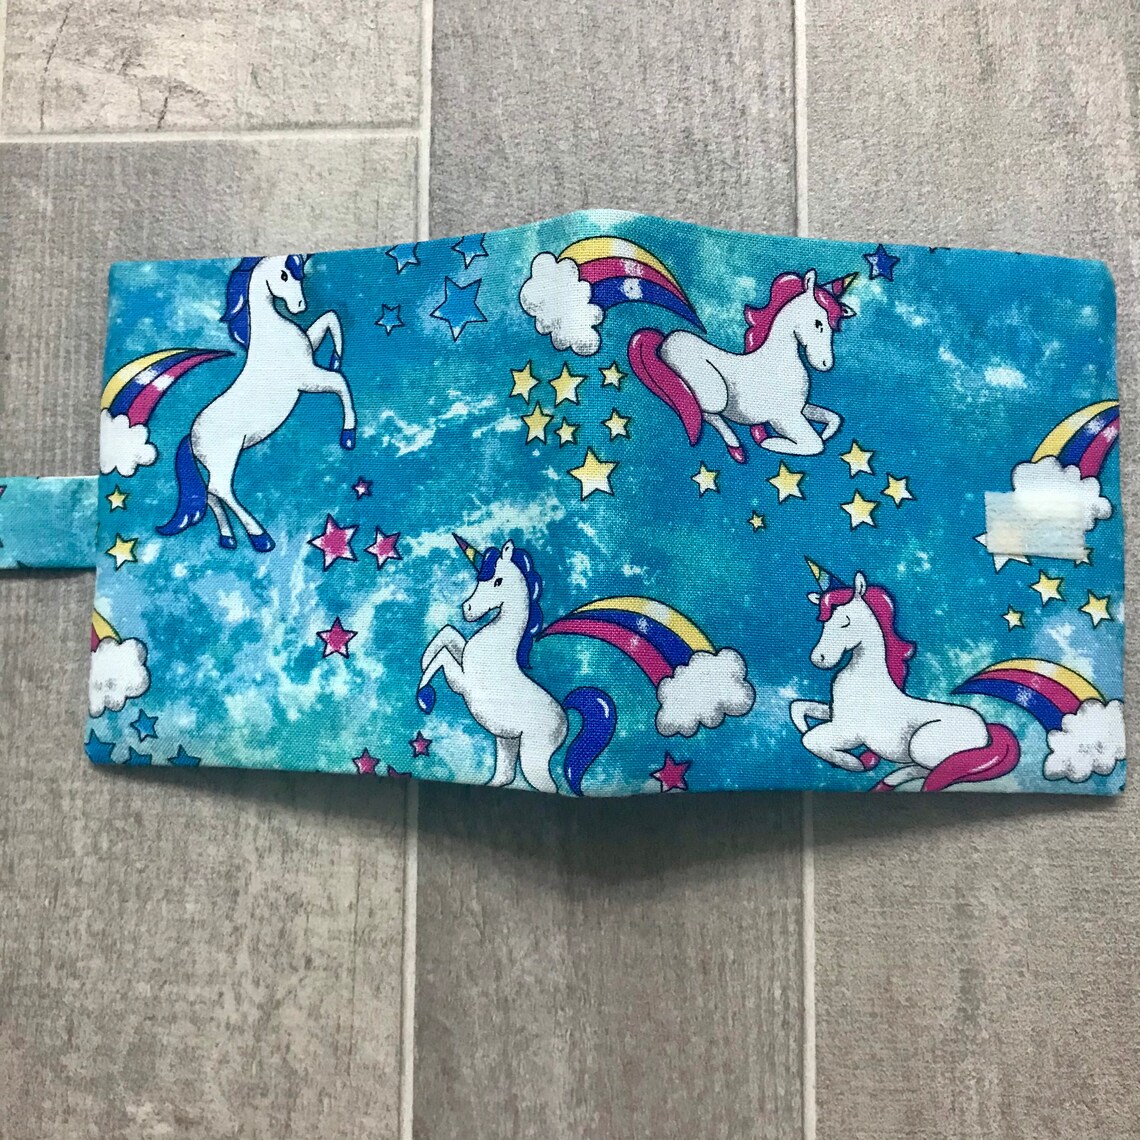 Unicorn wallet magical wallet Childrens Wallet girls | Etsy